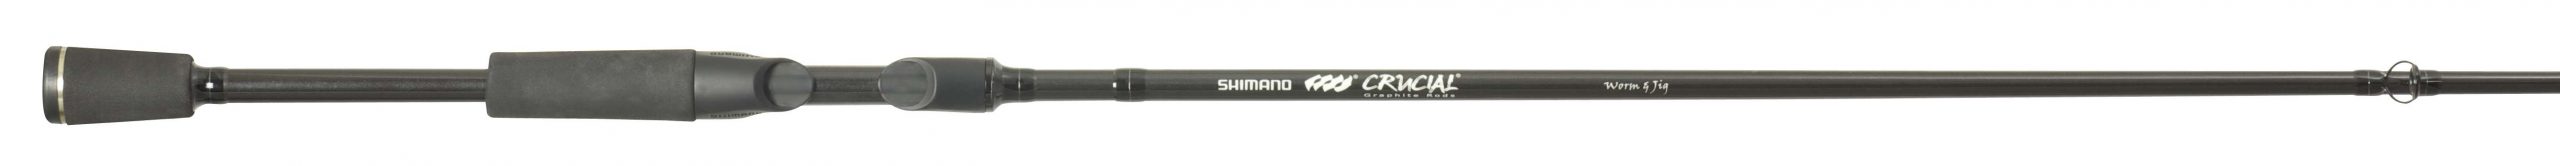 <p>
	<strong>Shimano Crucial rod</strong><br />
	This rod series has just about every technique covered from medium-action spinning to extra-heavy action flipping sticks. They come with premium Fuji components and a limited-lifetime over-the-counter replacement warranty.</p>
